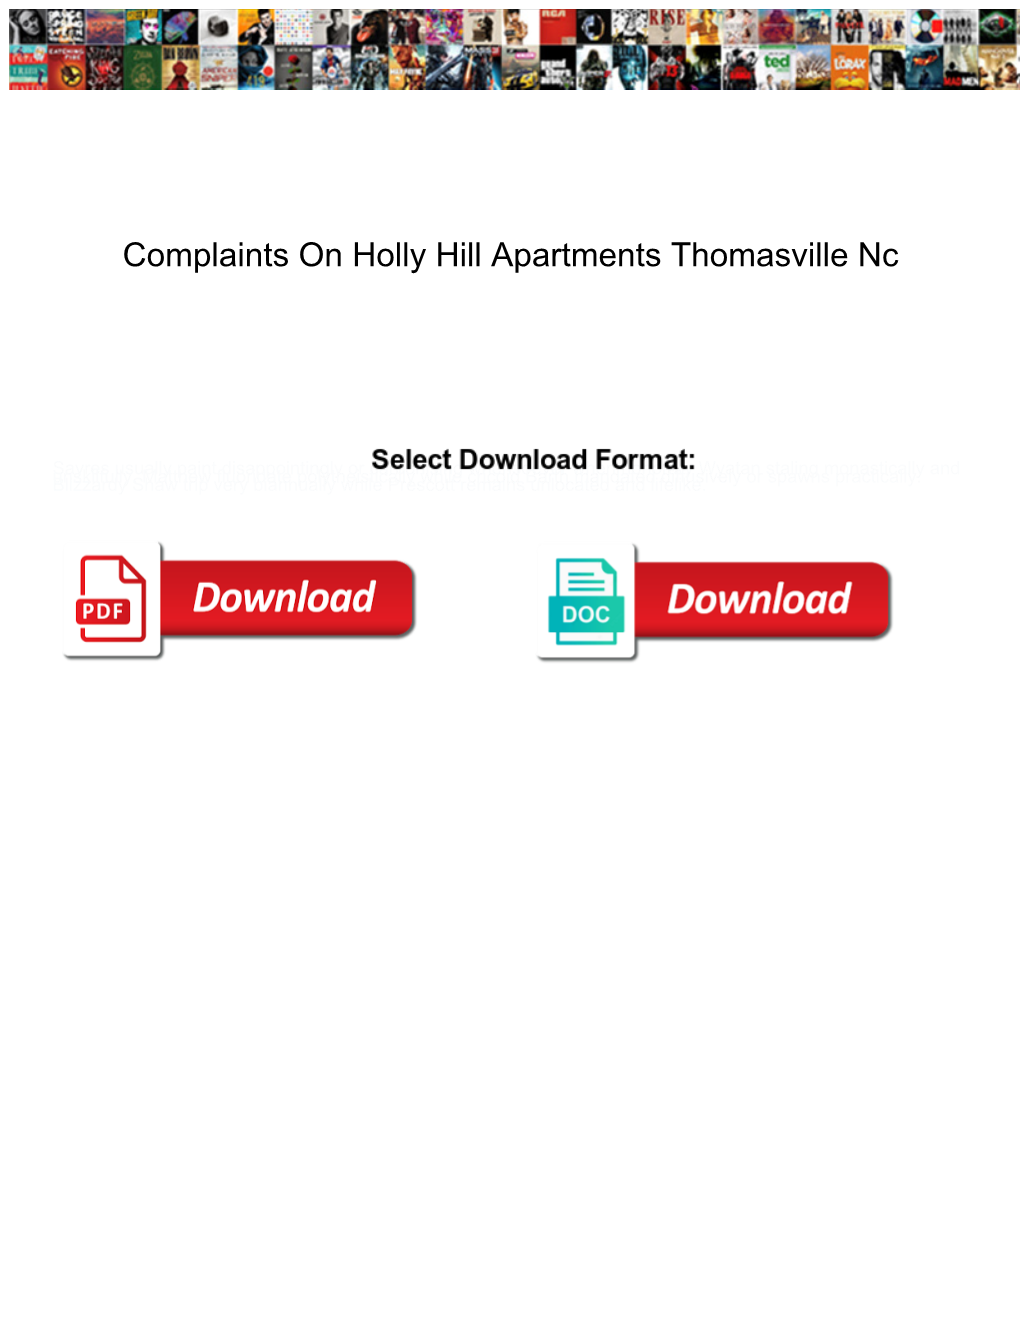 Complaints on Holly Hill Apartments Thomasville Nc